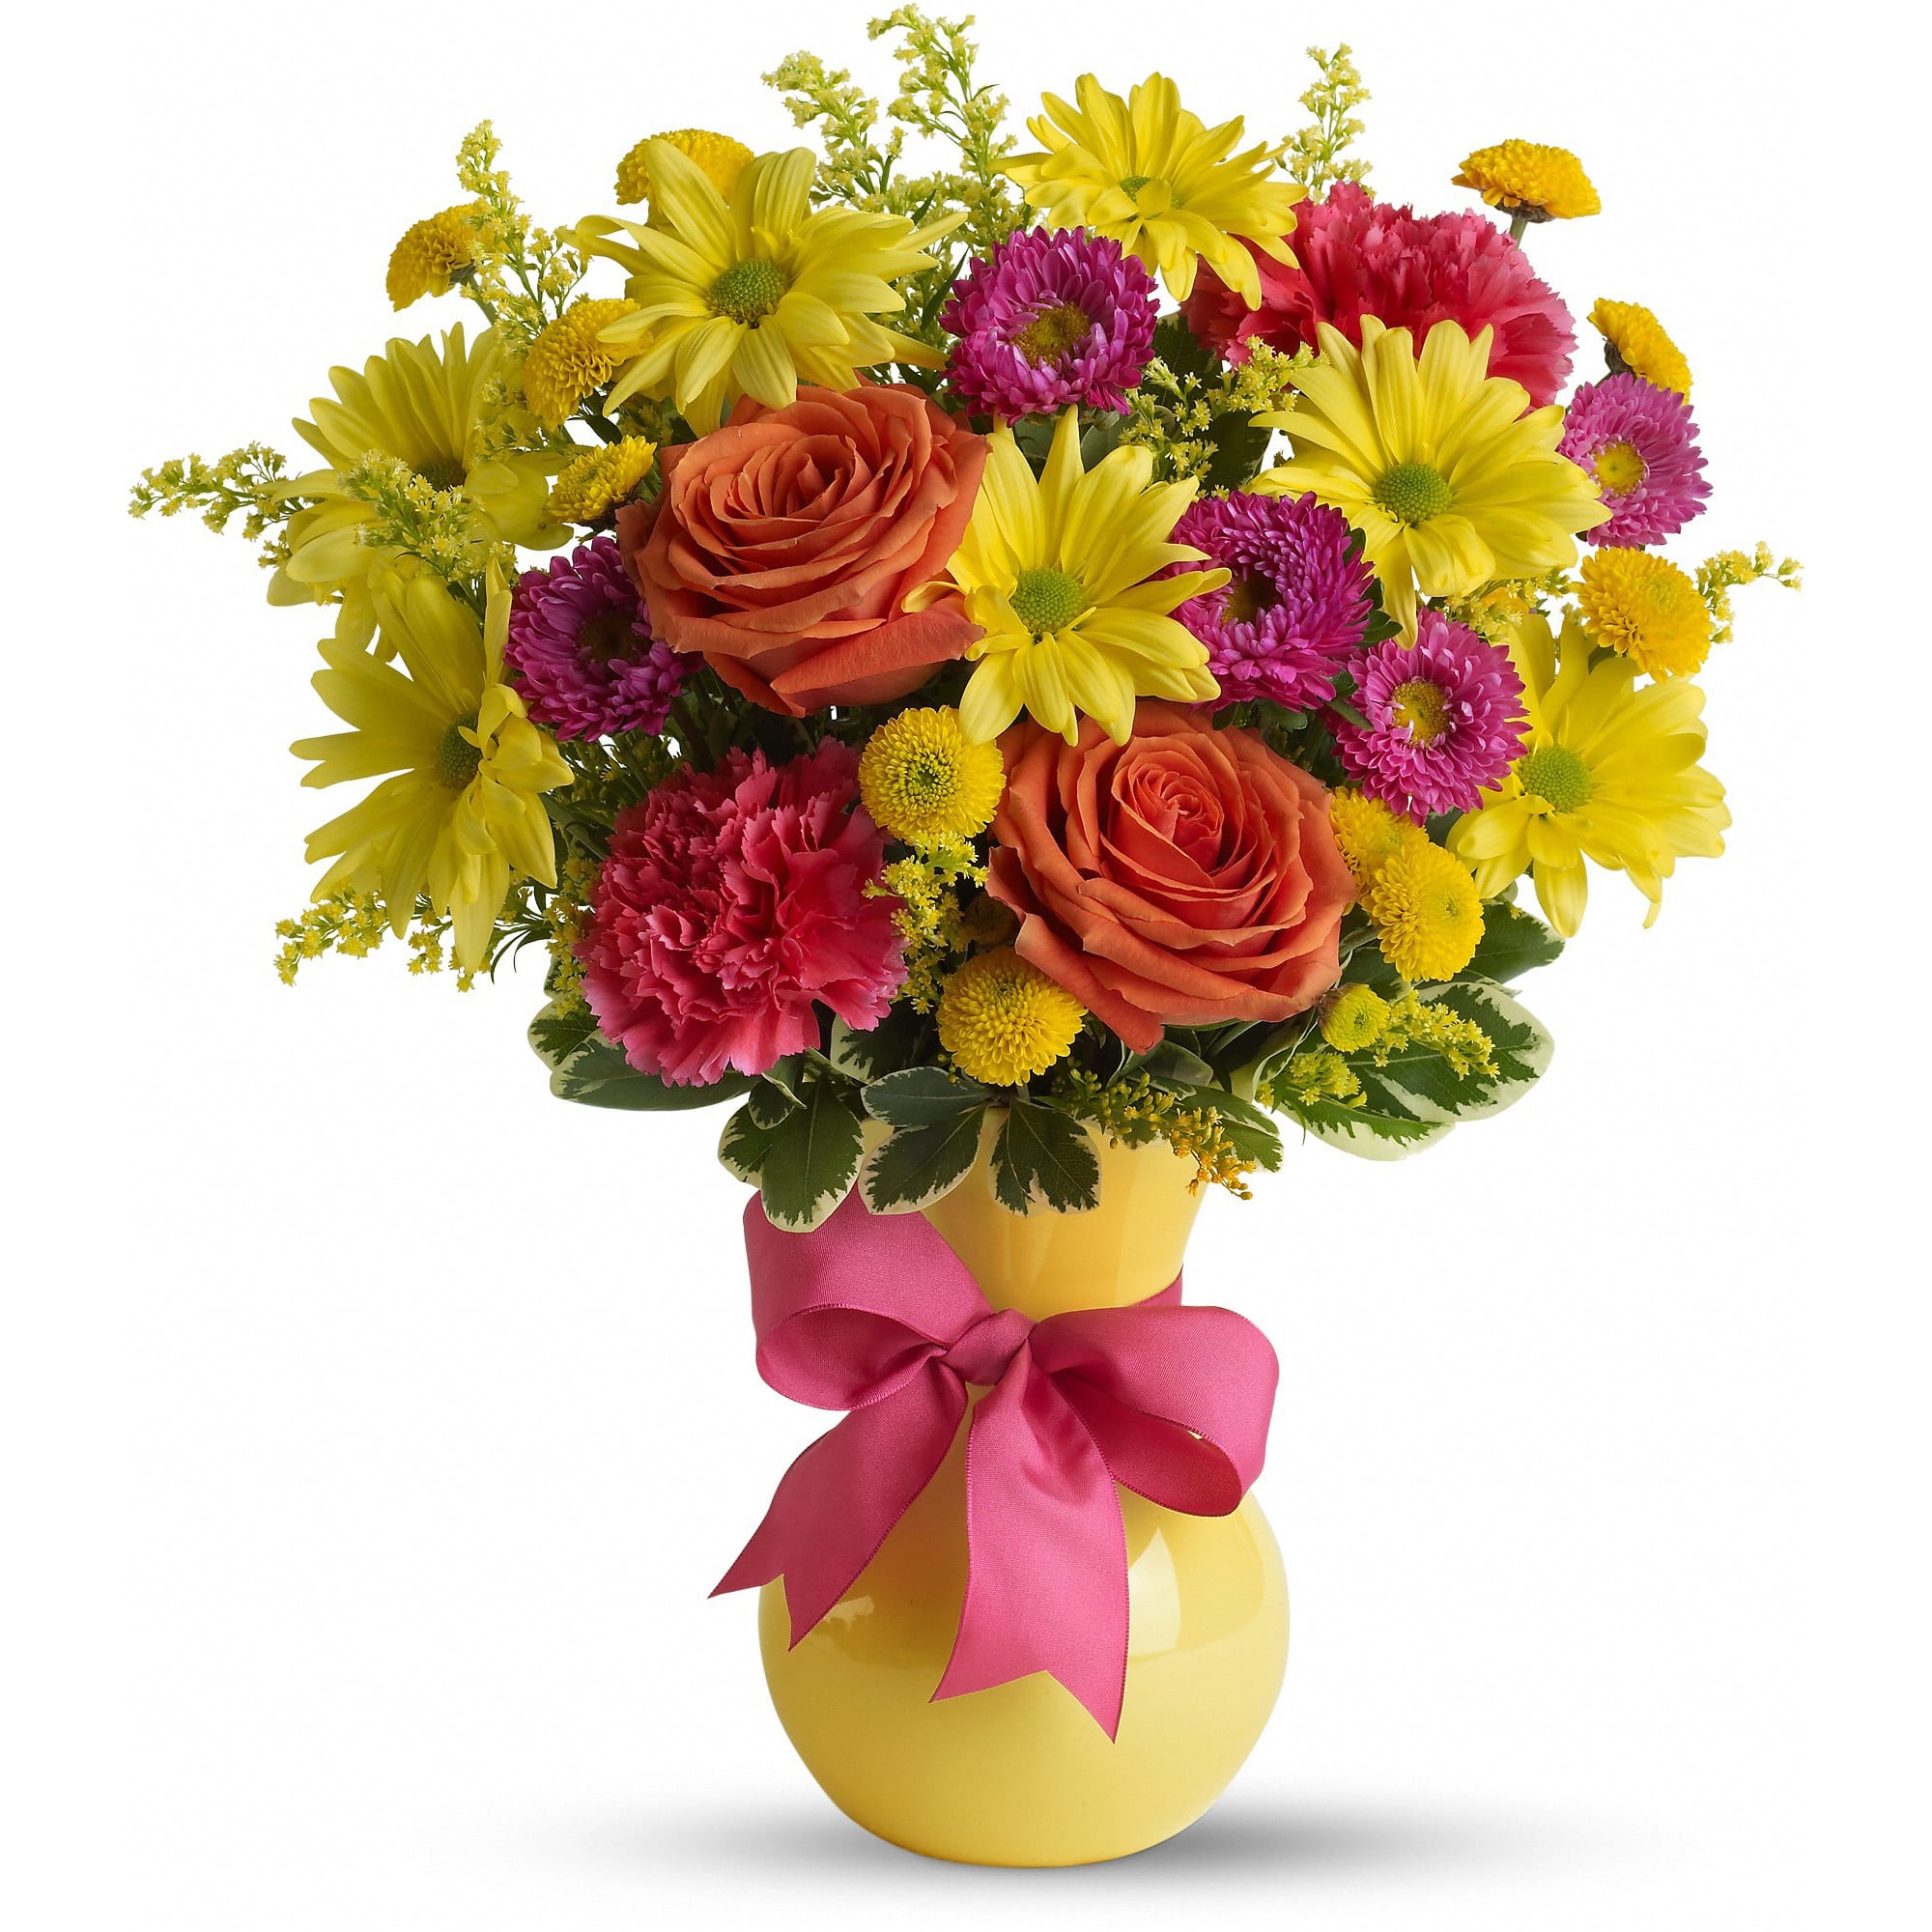 Teleflora's Hooray-diant! - It's called &quot;Hoo-radiant!&quot; The perfect name for this exuberant gift of orange roses, hot pink carnations and other favorites bursting from a sunny yellow vase they'll love. Go ahead, make their day. 